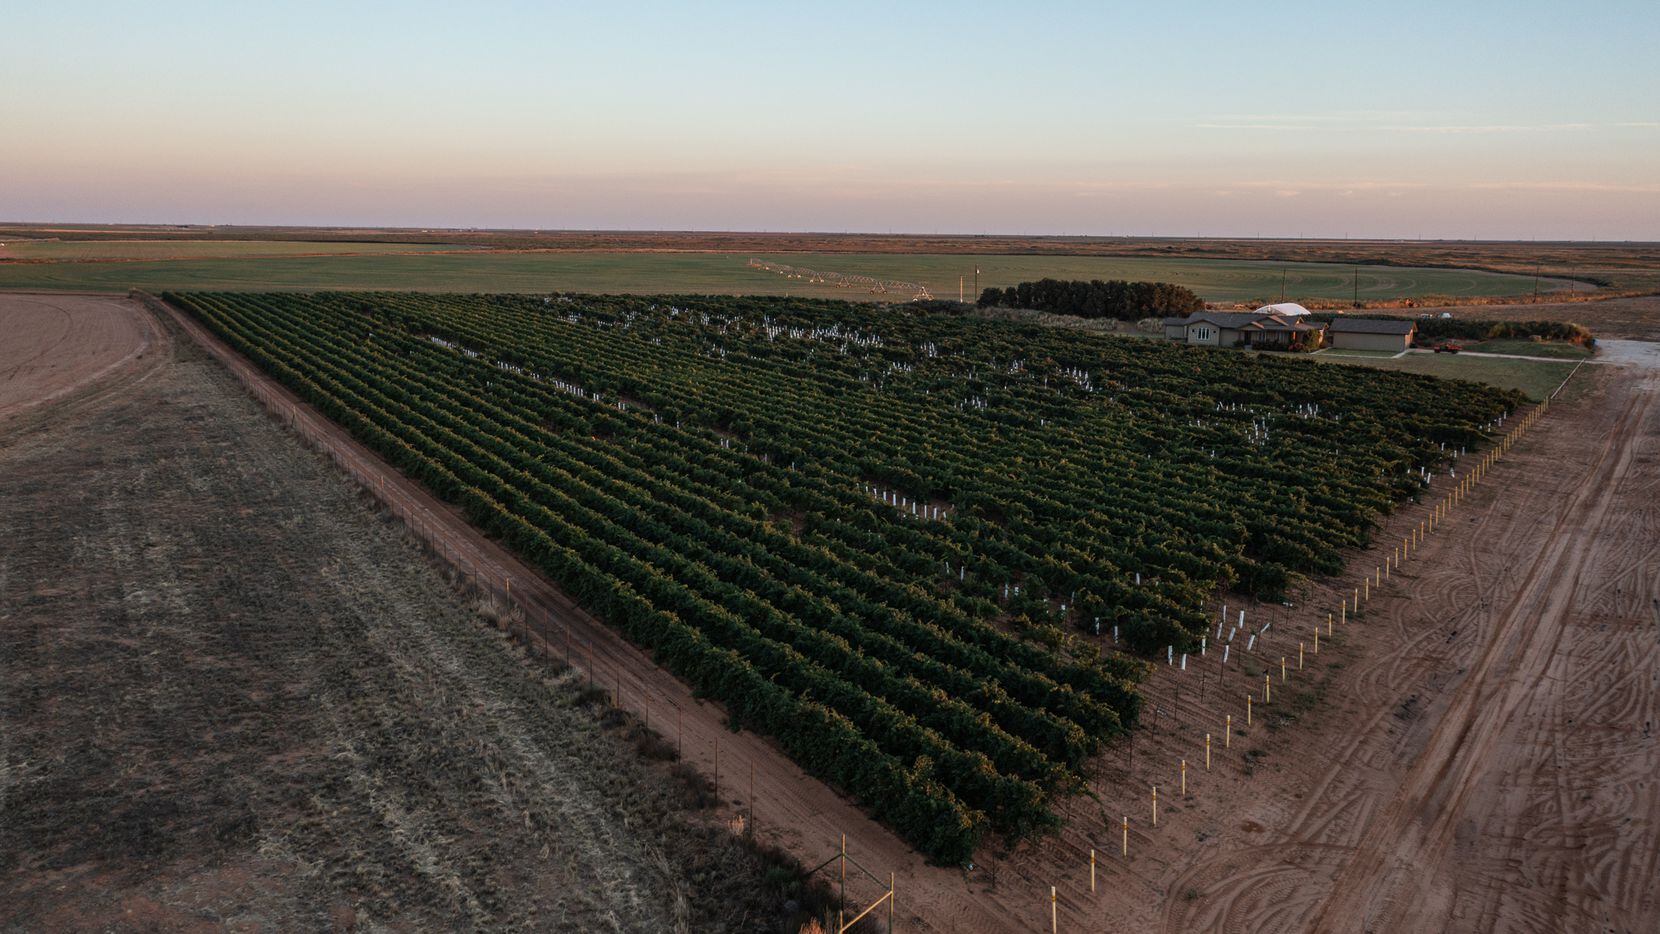 Buena Suerte Vineyard in Terry County is part of a 640-acre property listed for sale at...